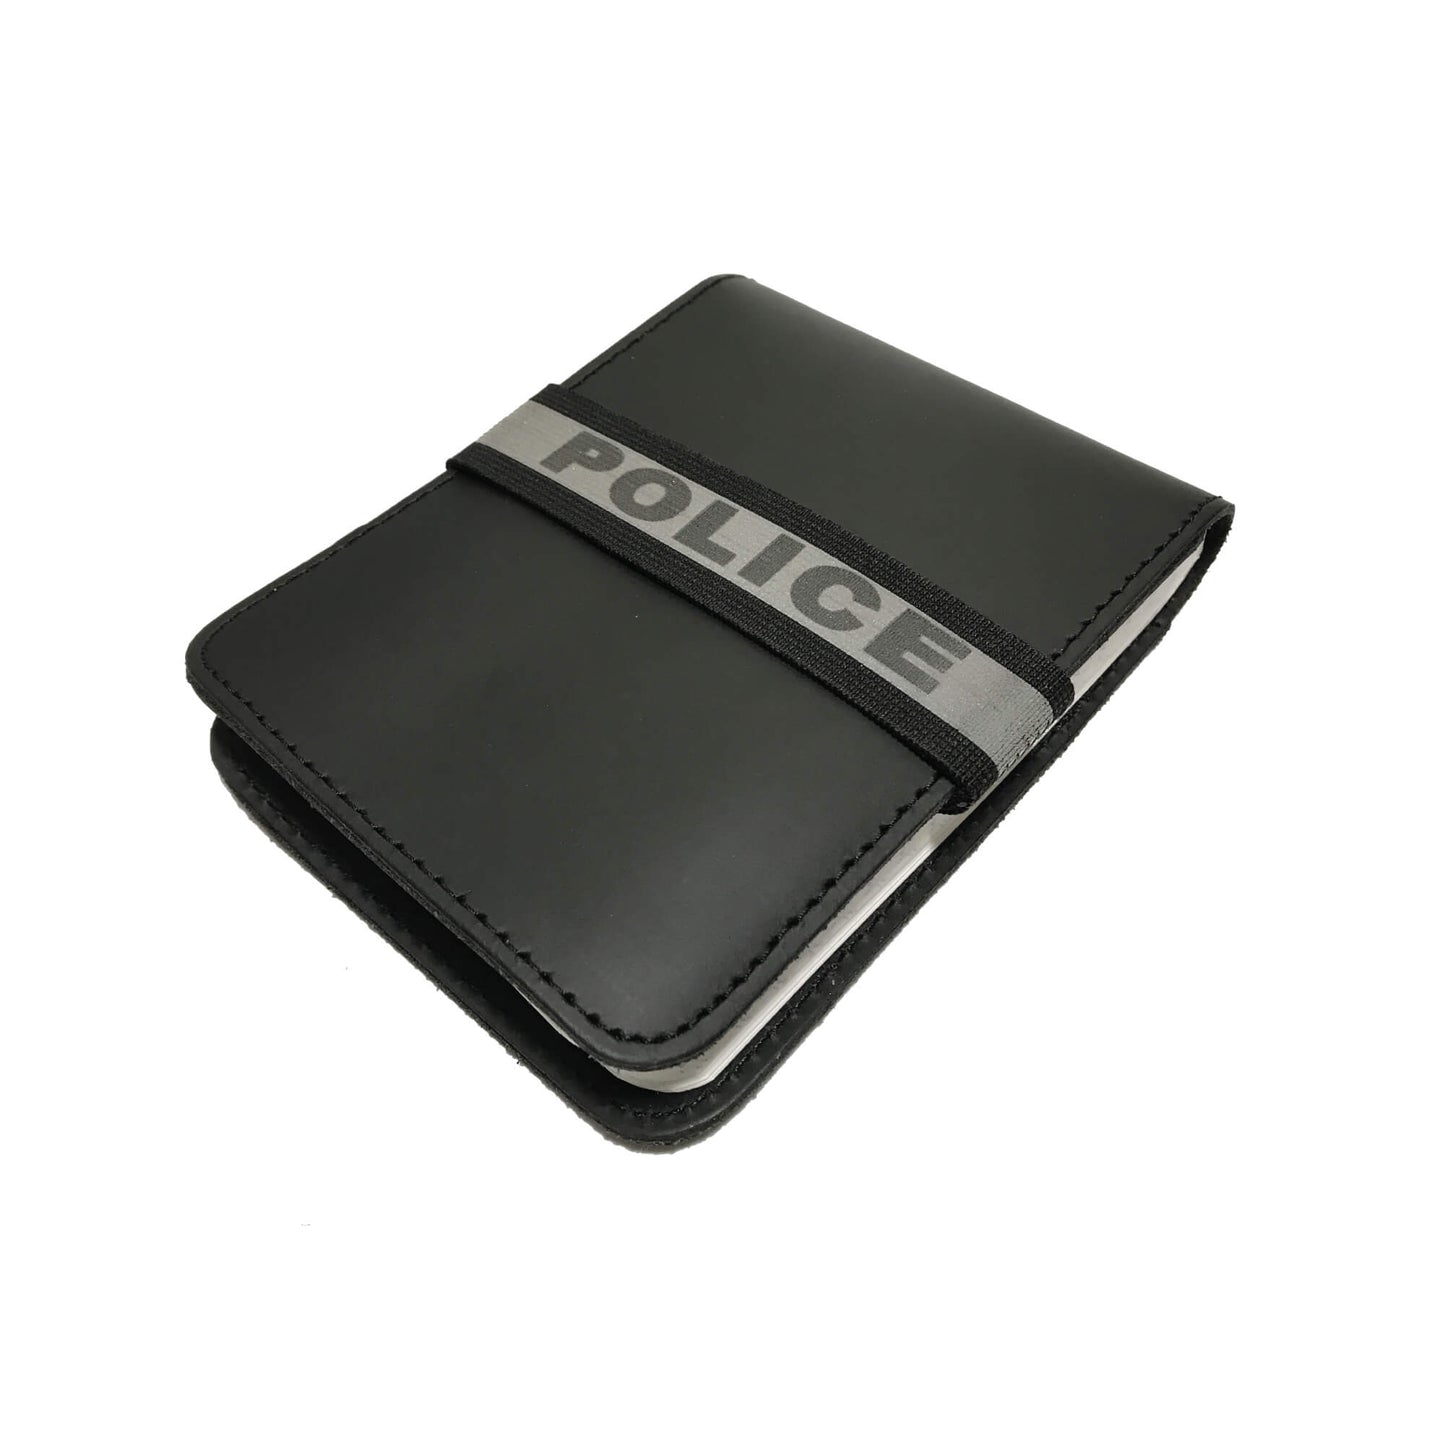 Alberta Peace Officer Notebook Cover-Perfect Fit-911 Duty Gear Canada